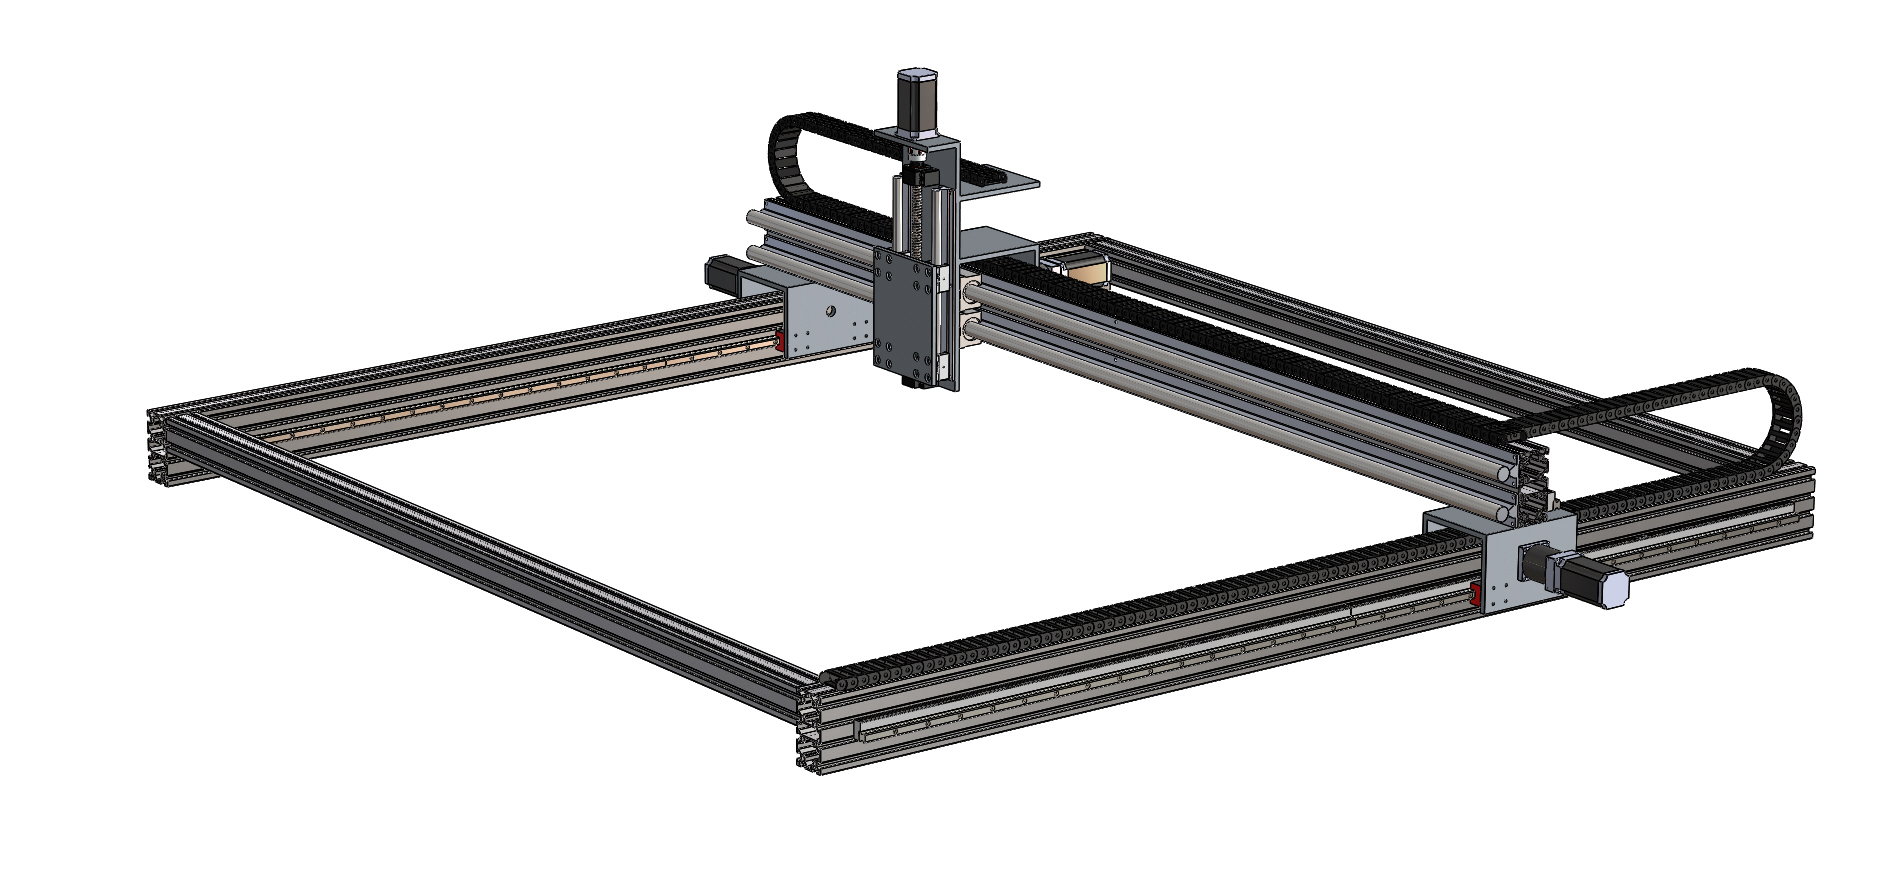 Industrial CNC frame 2x2 m (6x6') with the laser module. - EnduranceLasers